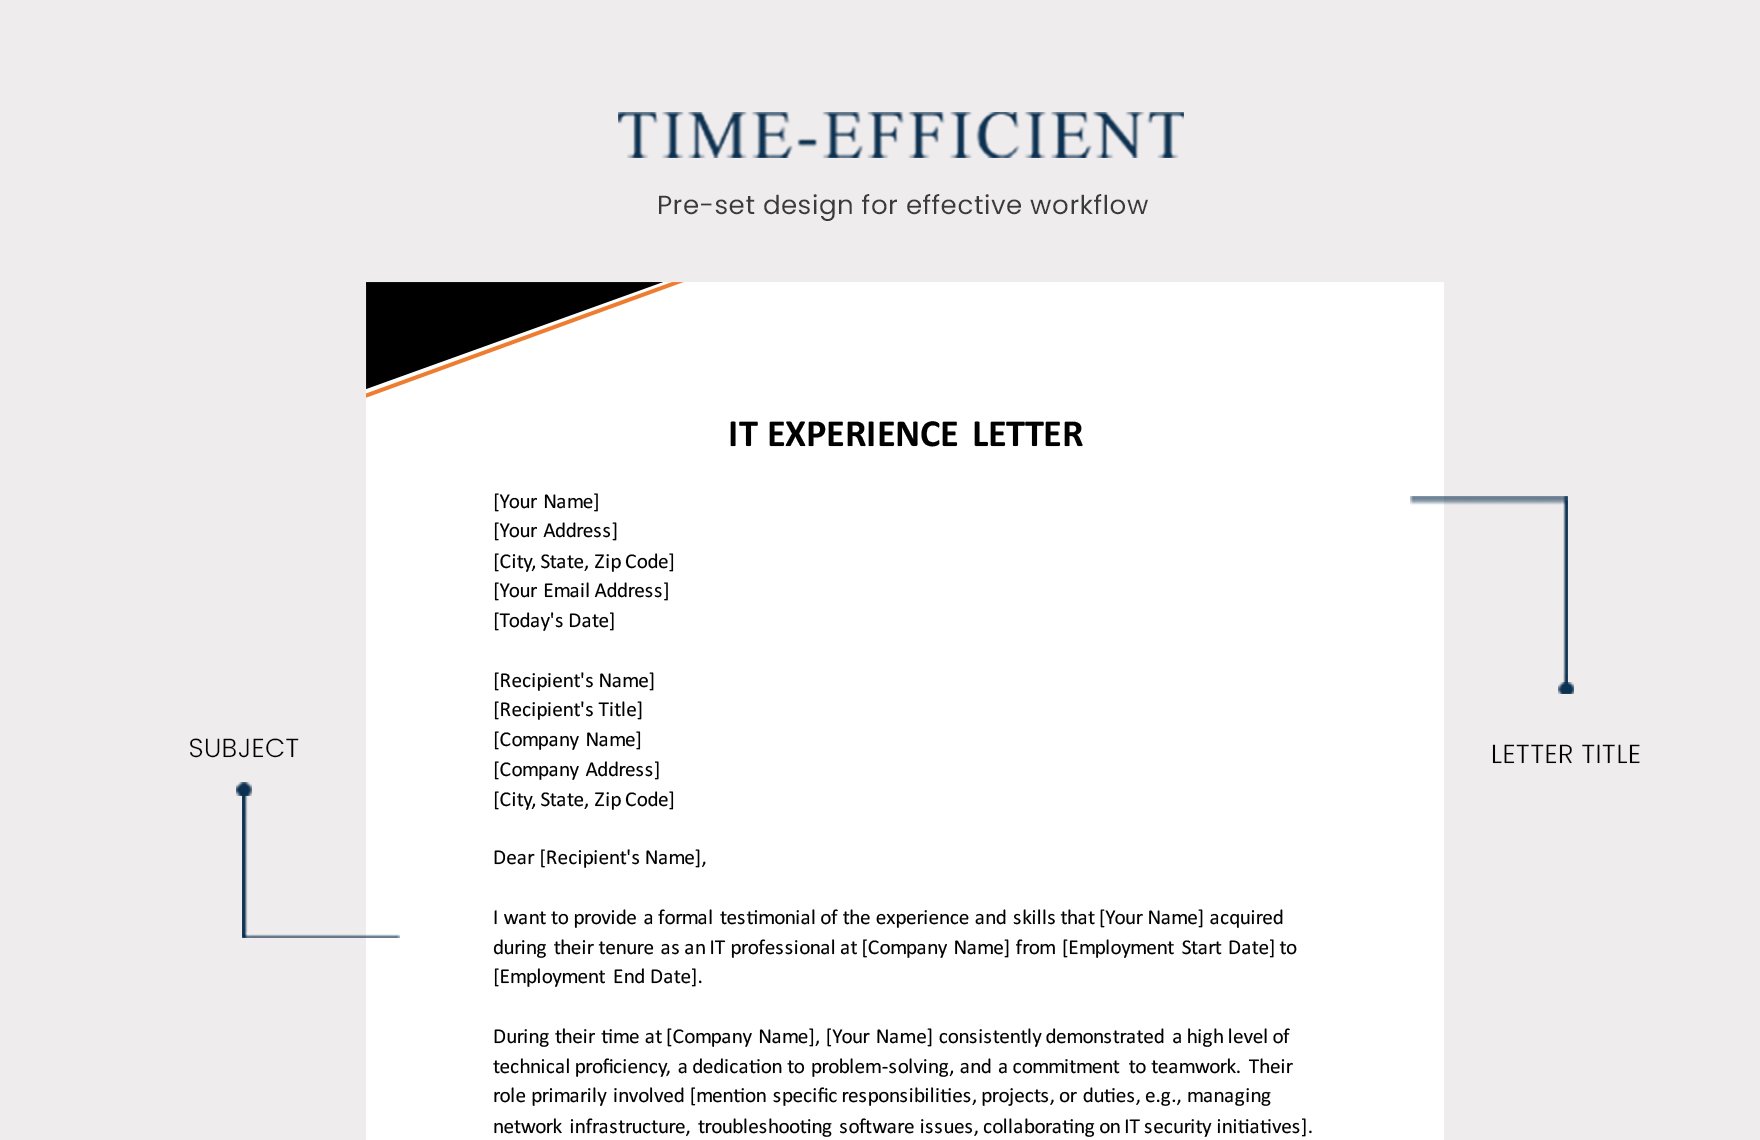 It Experience Letter